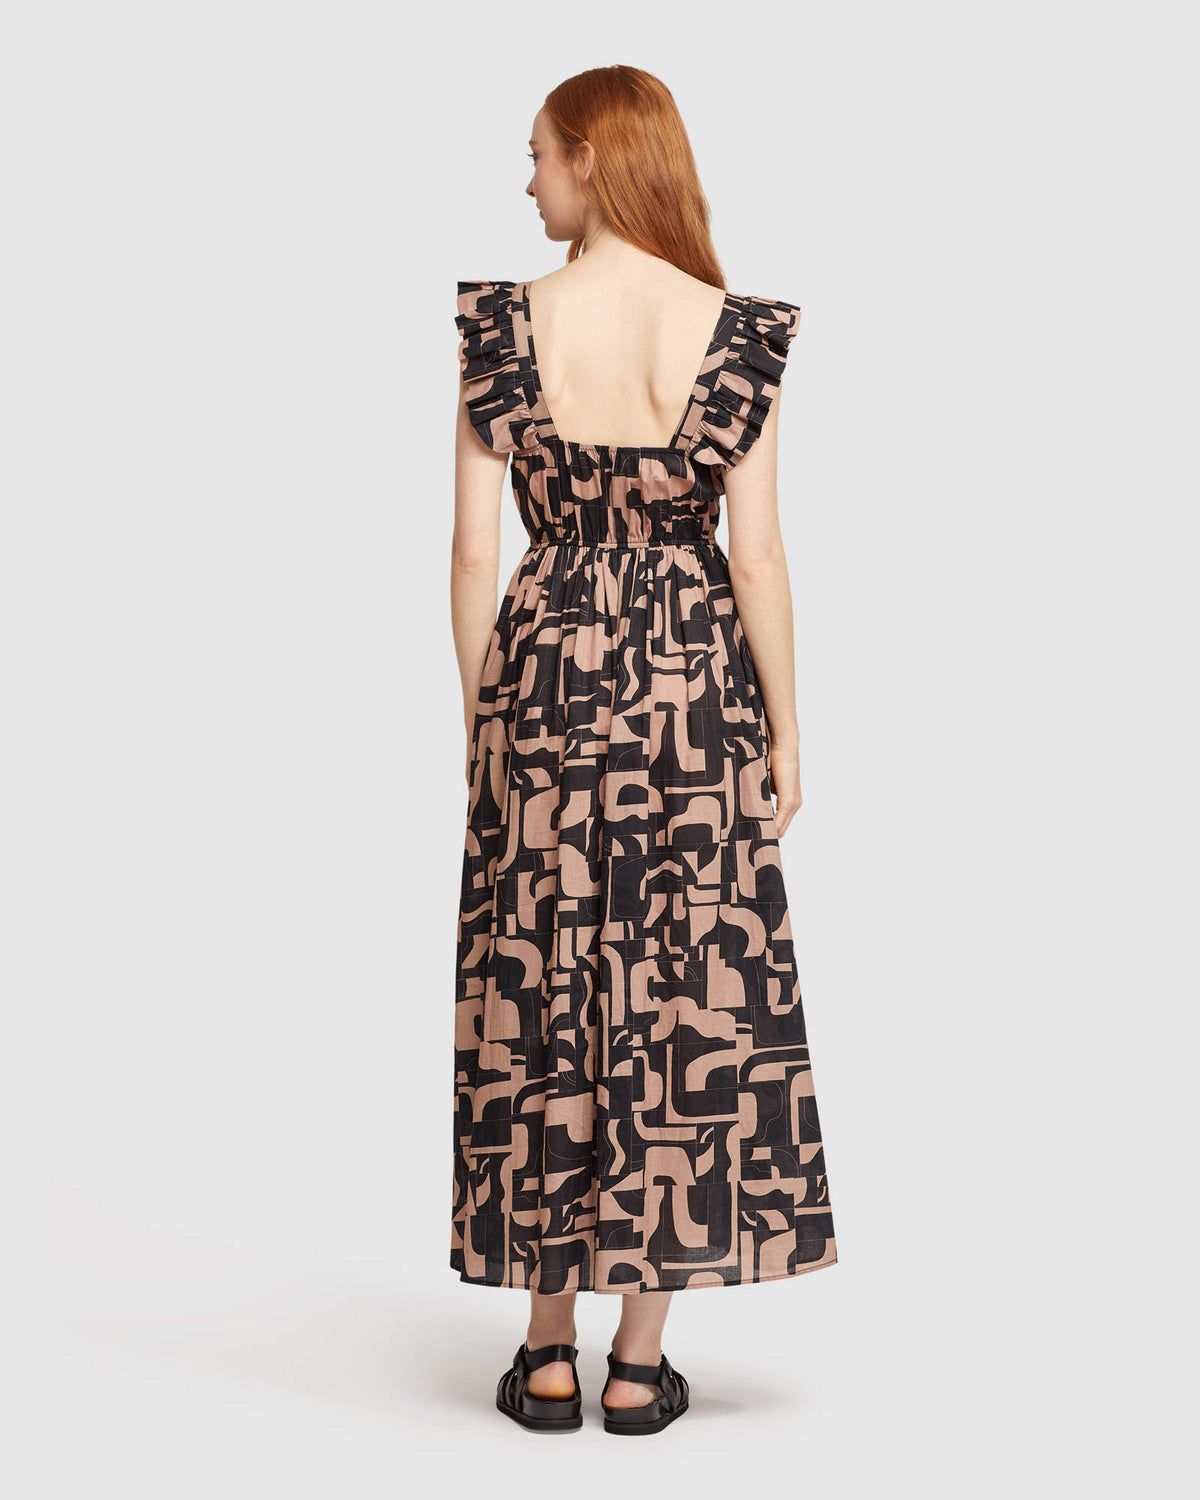 ANNIE GEO PRINT VOILE DRESS - AVAILABLE ~ 1-2 weeks WOMENS DRESSES